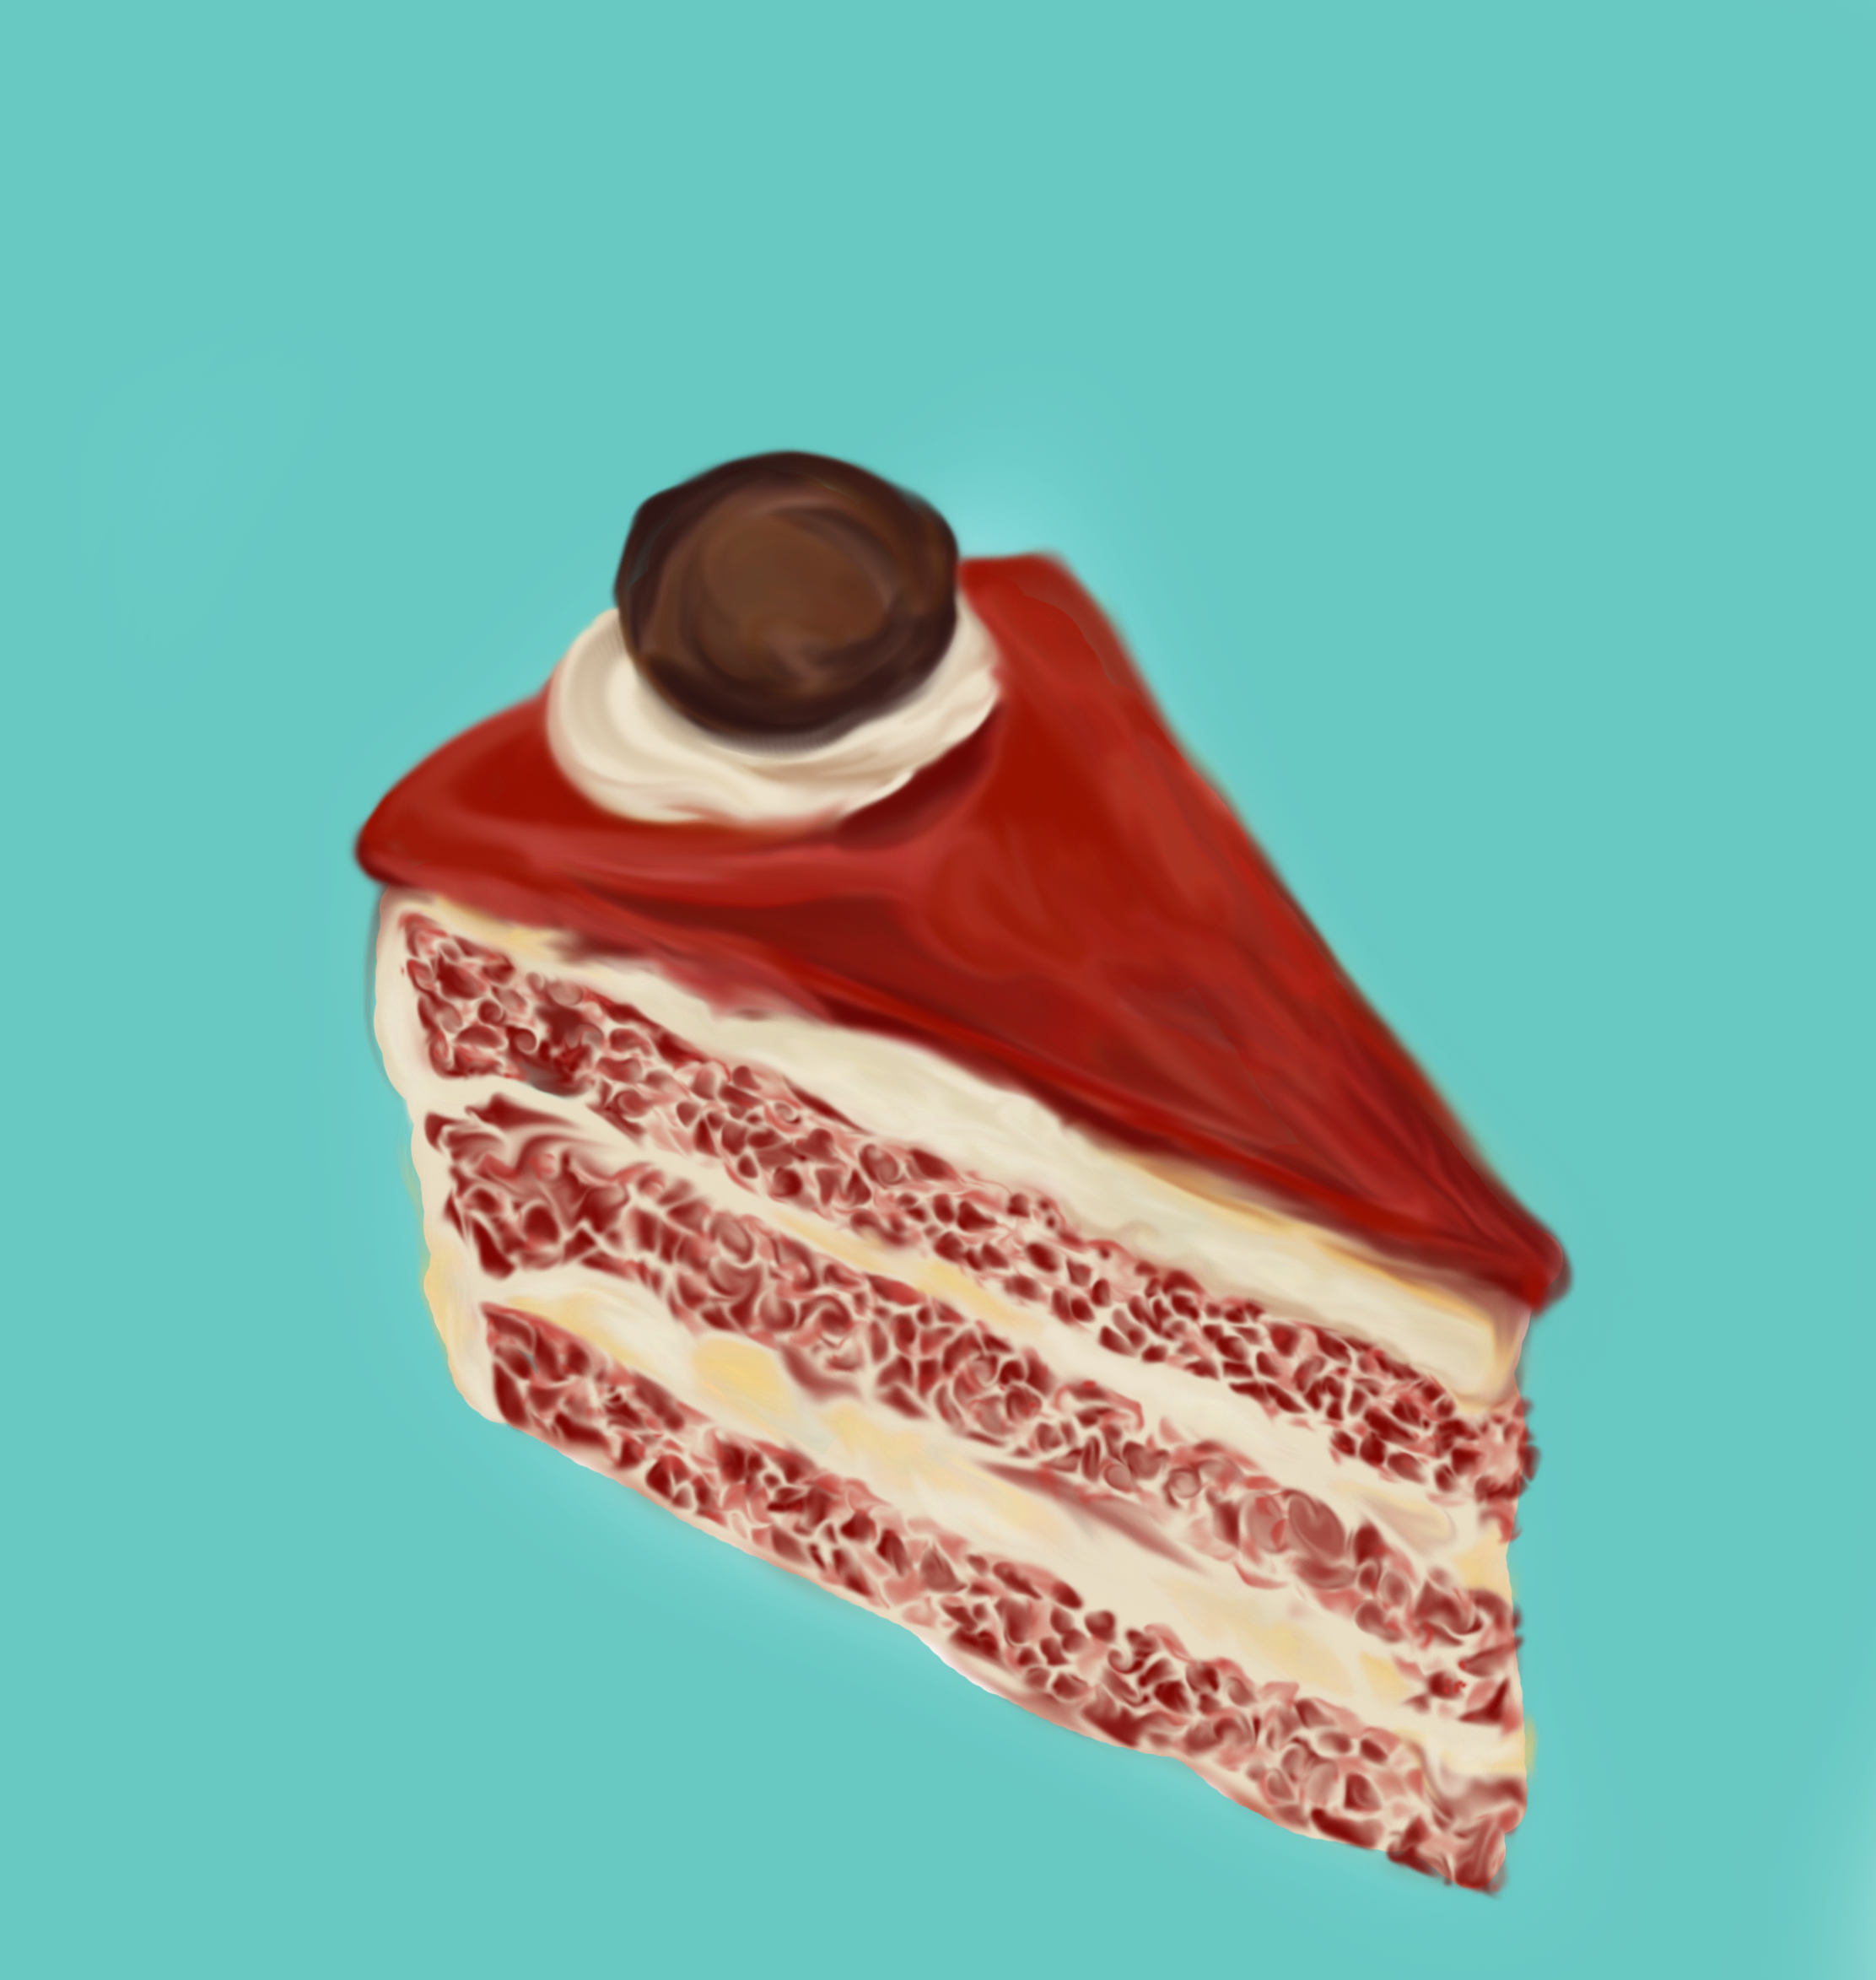 red velvet cake with chocolate